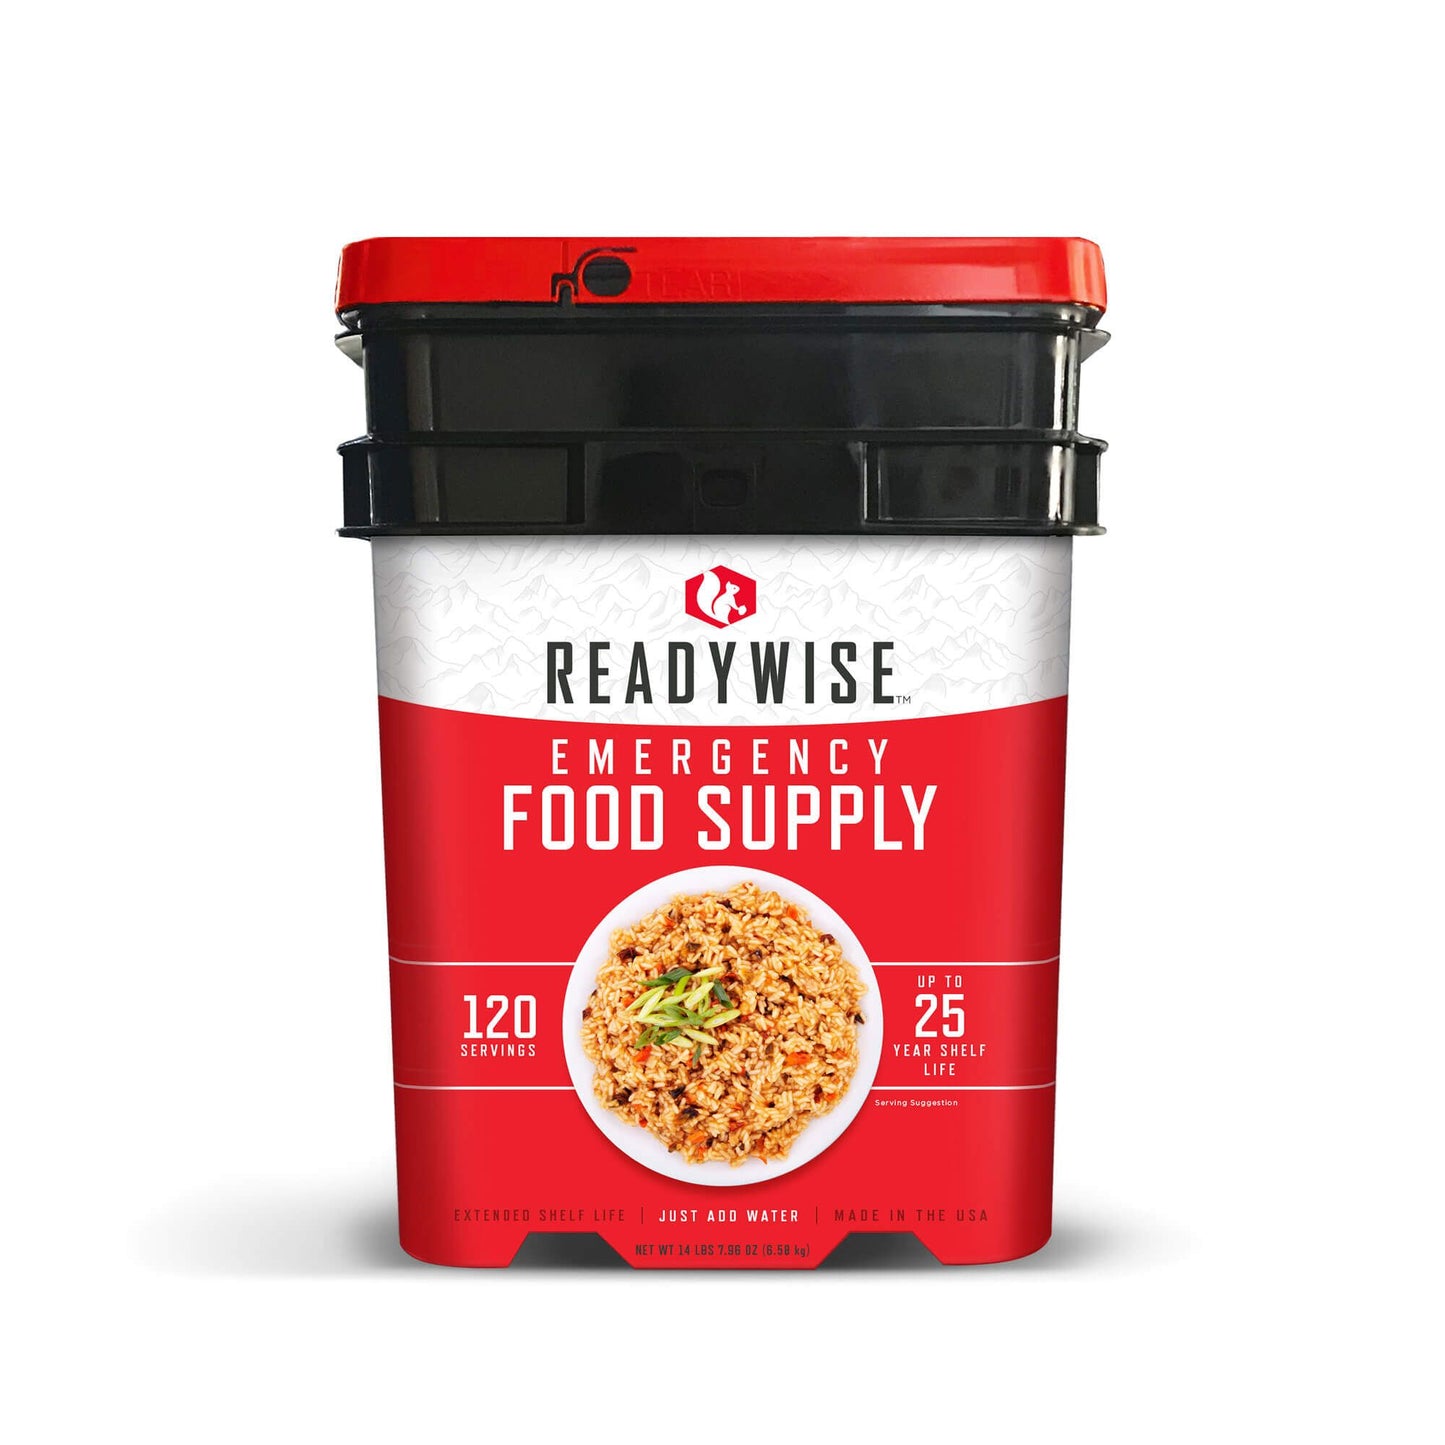 ReadyWise 120 Serving Emergency Food Supply displayed on a white background